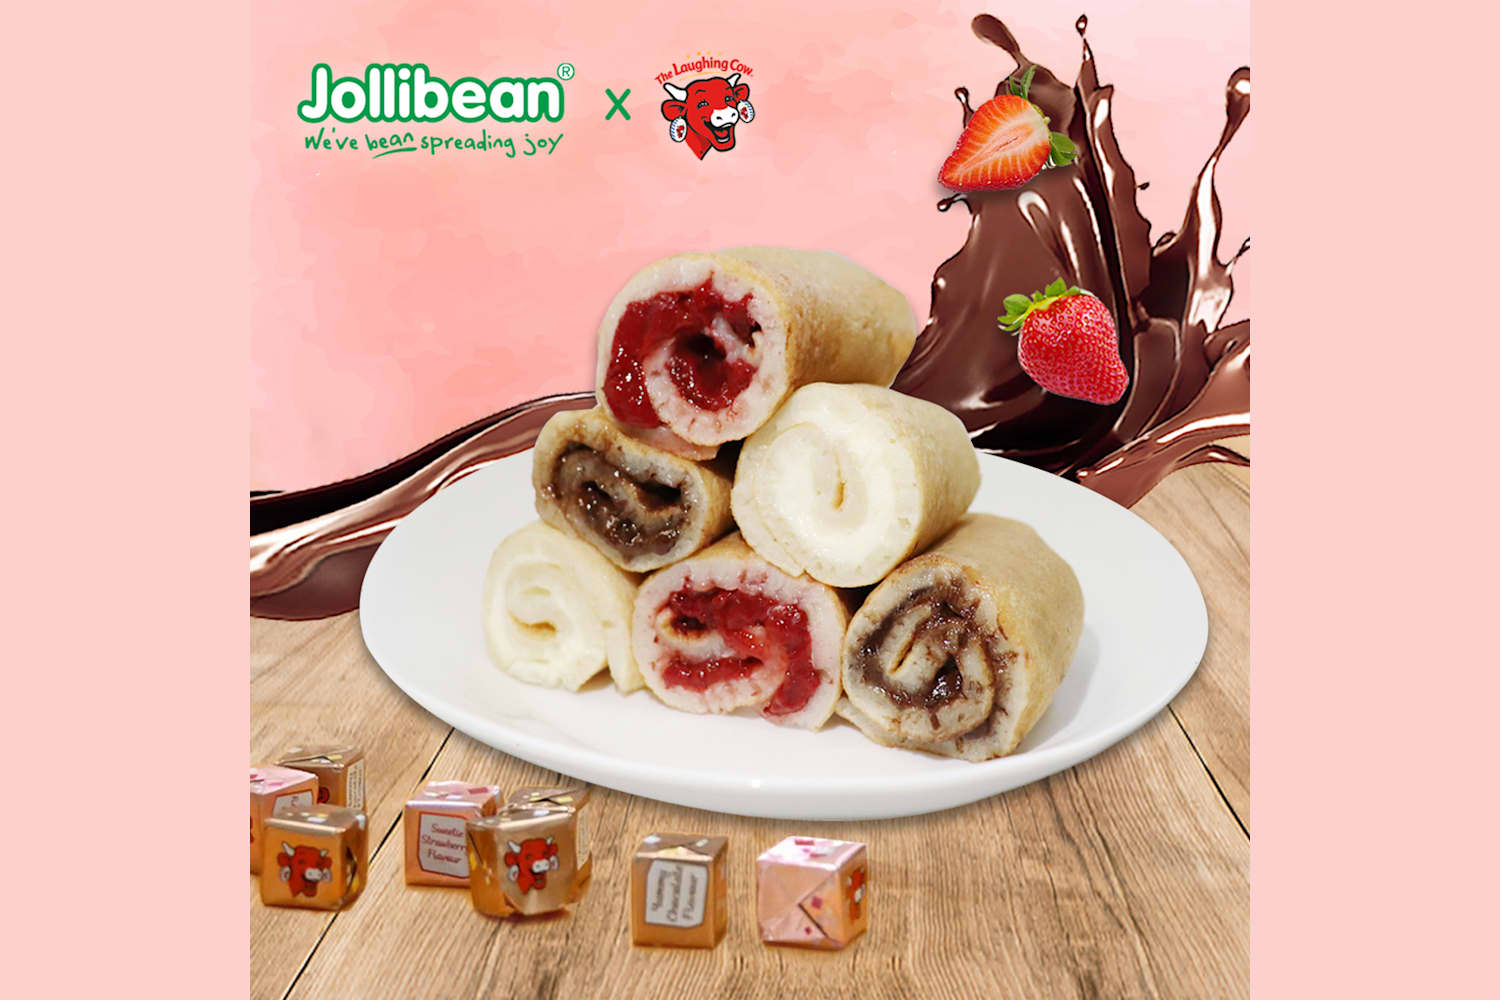 1 x Cheesy Strawberry & Chocolate Miniroll at Jollibean - Get Deals, Cashback and Rewards with ShopBack GO